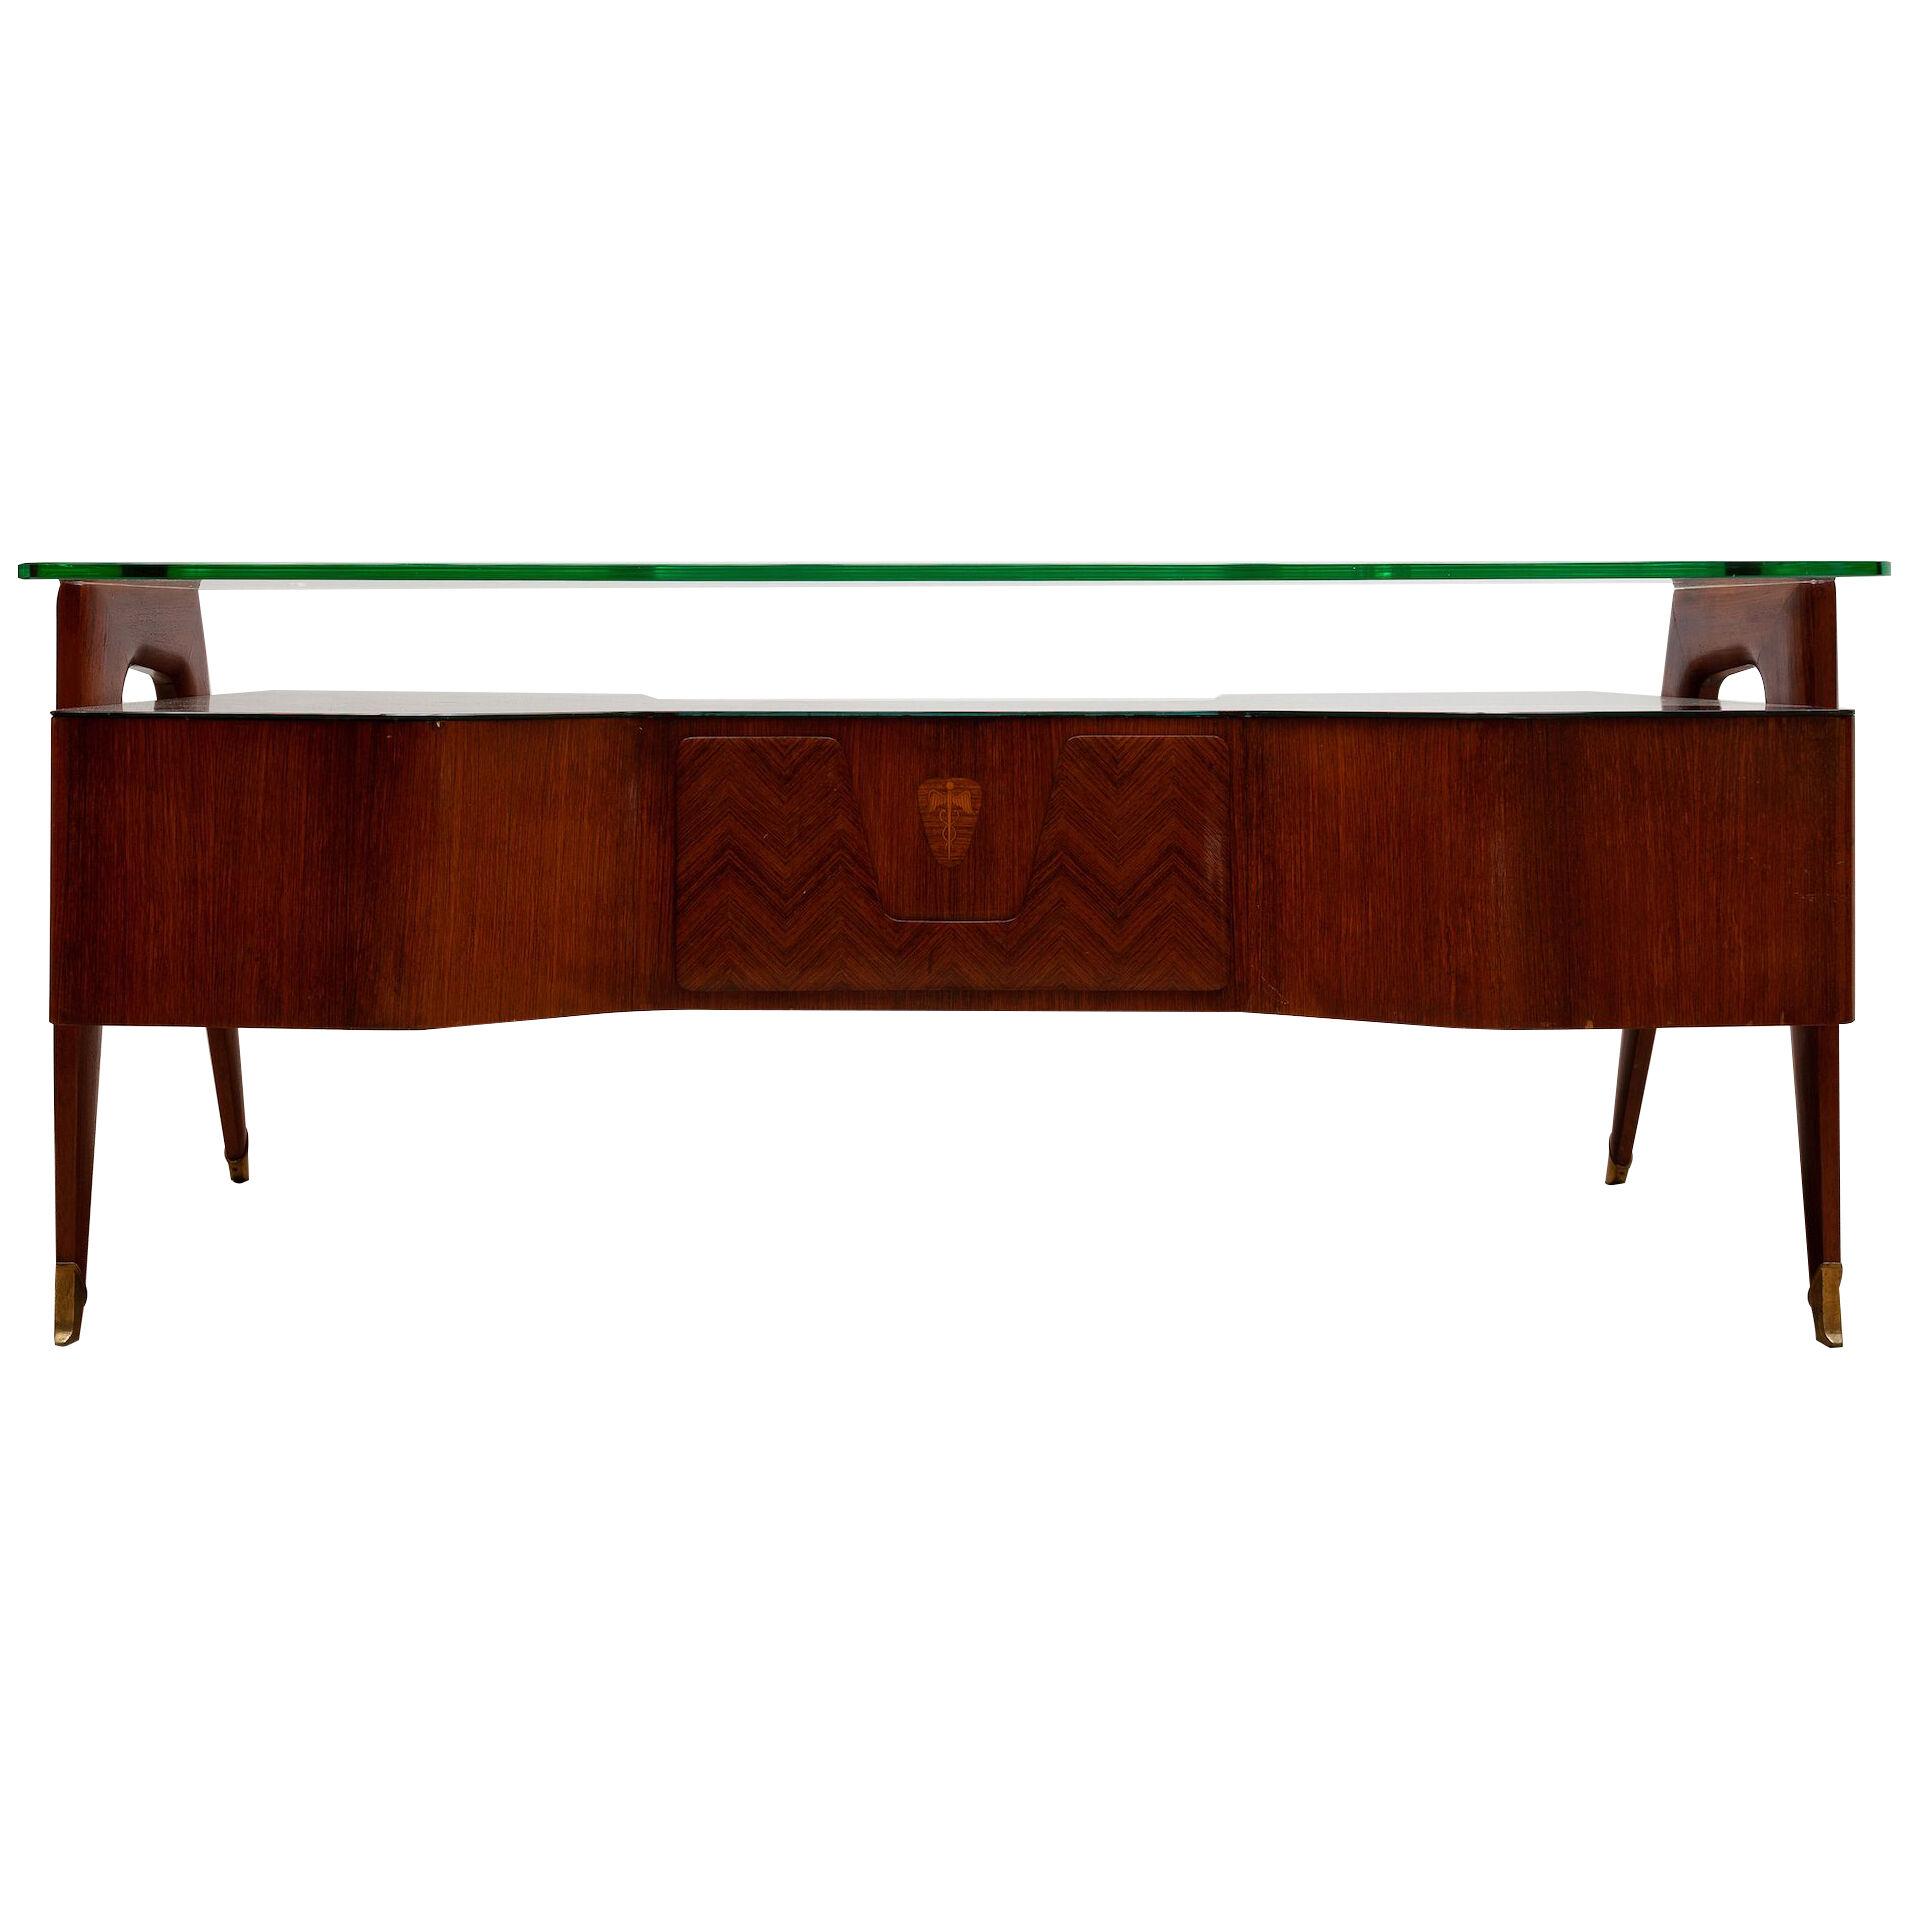 Presidential Desk with Floating Glass Top designed by Vittorio Dassi 1950s